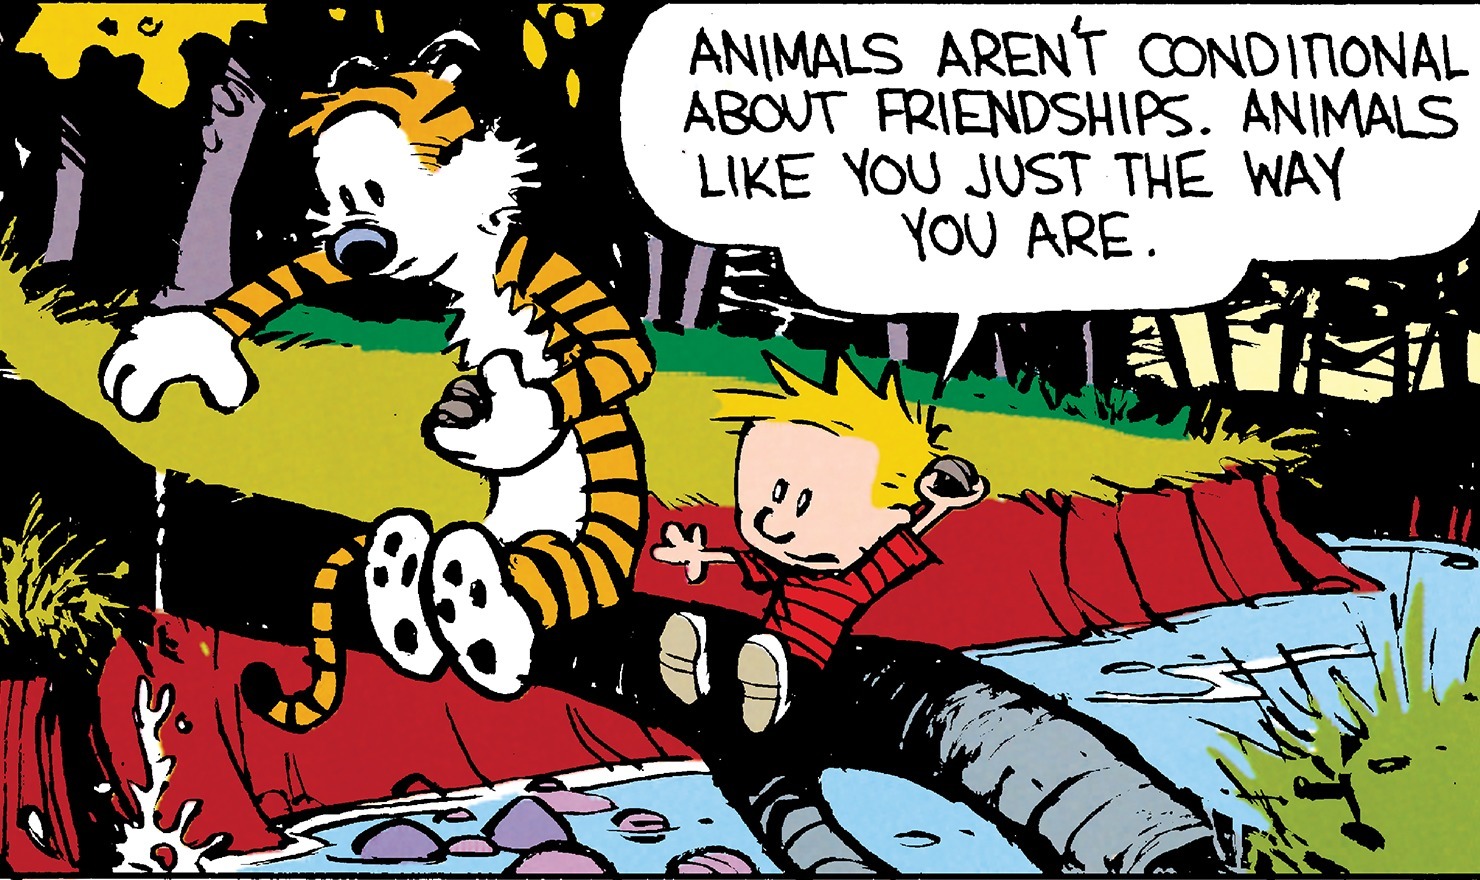 Calvin and Hobbes: Friendship Collection